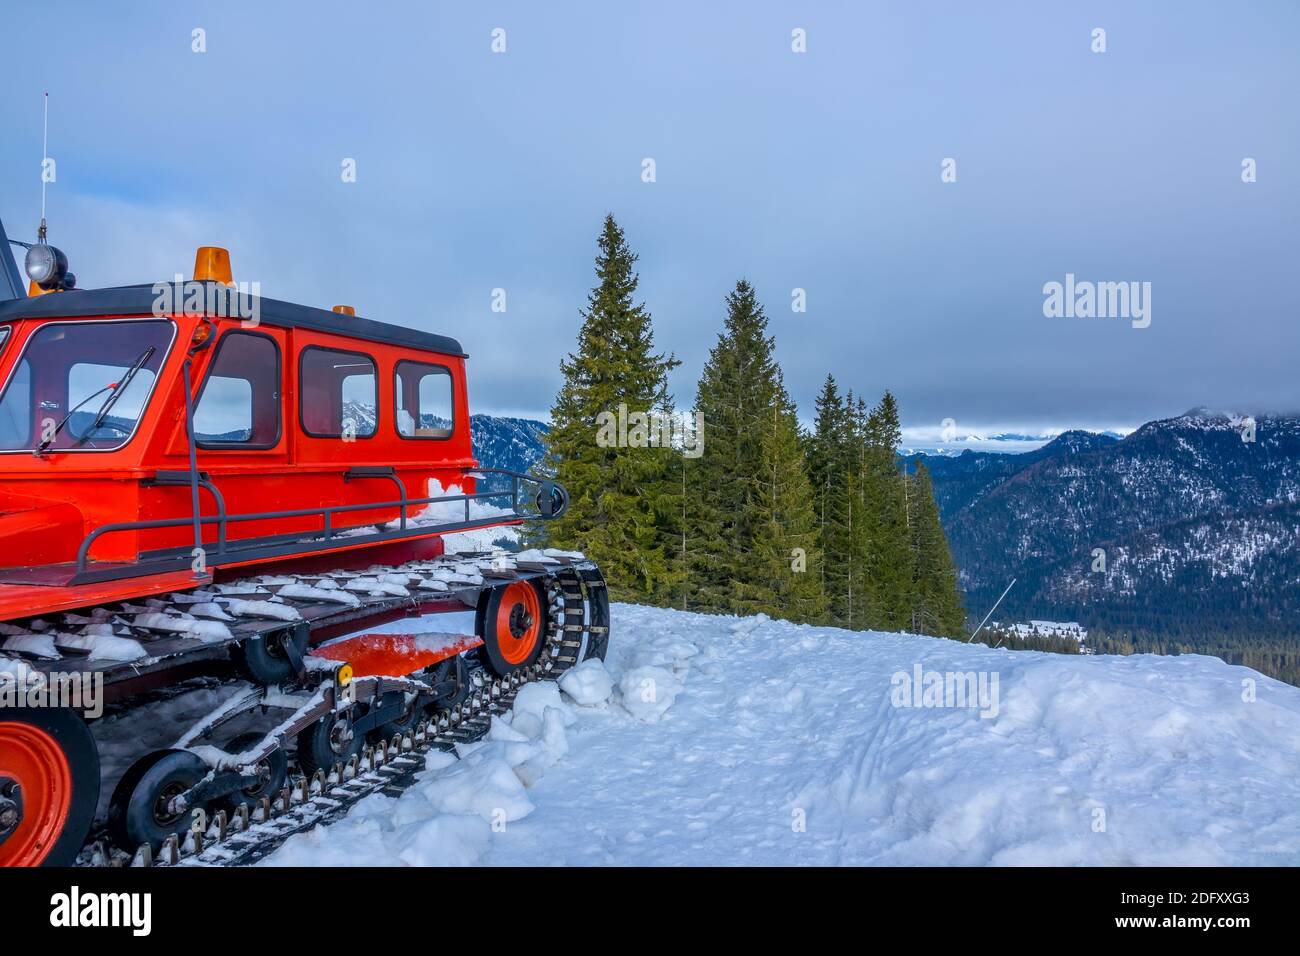 Cloudy sky over snow-capped mountain peaks. Wooded slopes. Red snowcat in the foreground Stock Photo